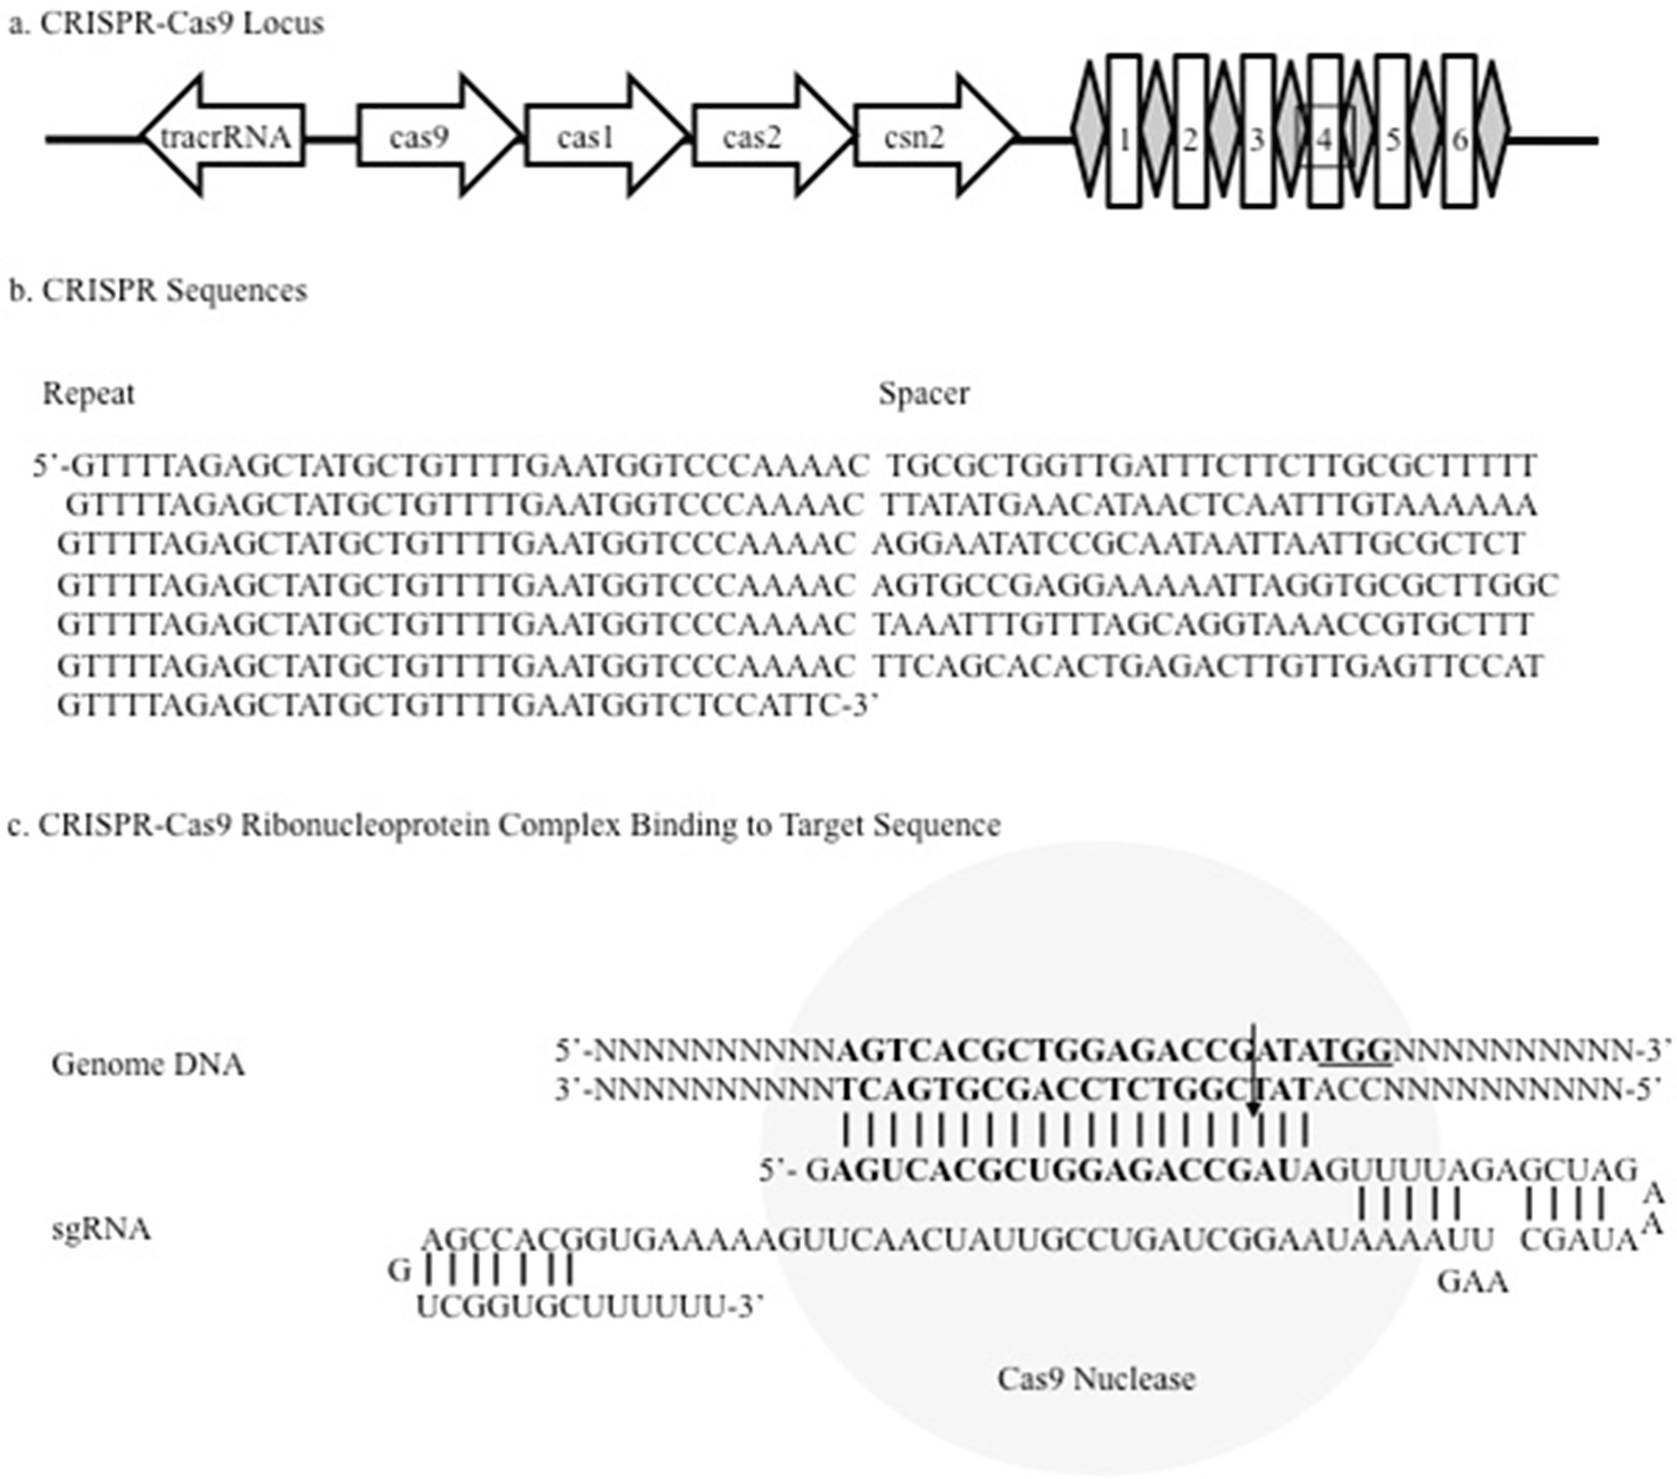 Delivery Of Crispr Cas9 Into Mouse Zygotes By Electroporation Springerlink Cas9 nuclease 3nls to 1 7. crispr cas9 into mouse zygotes